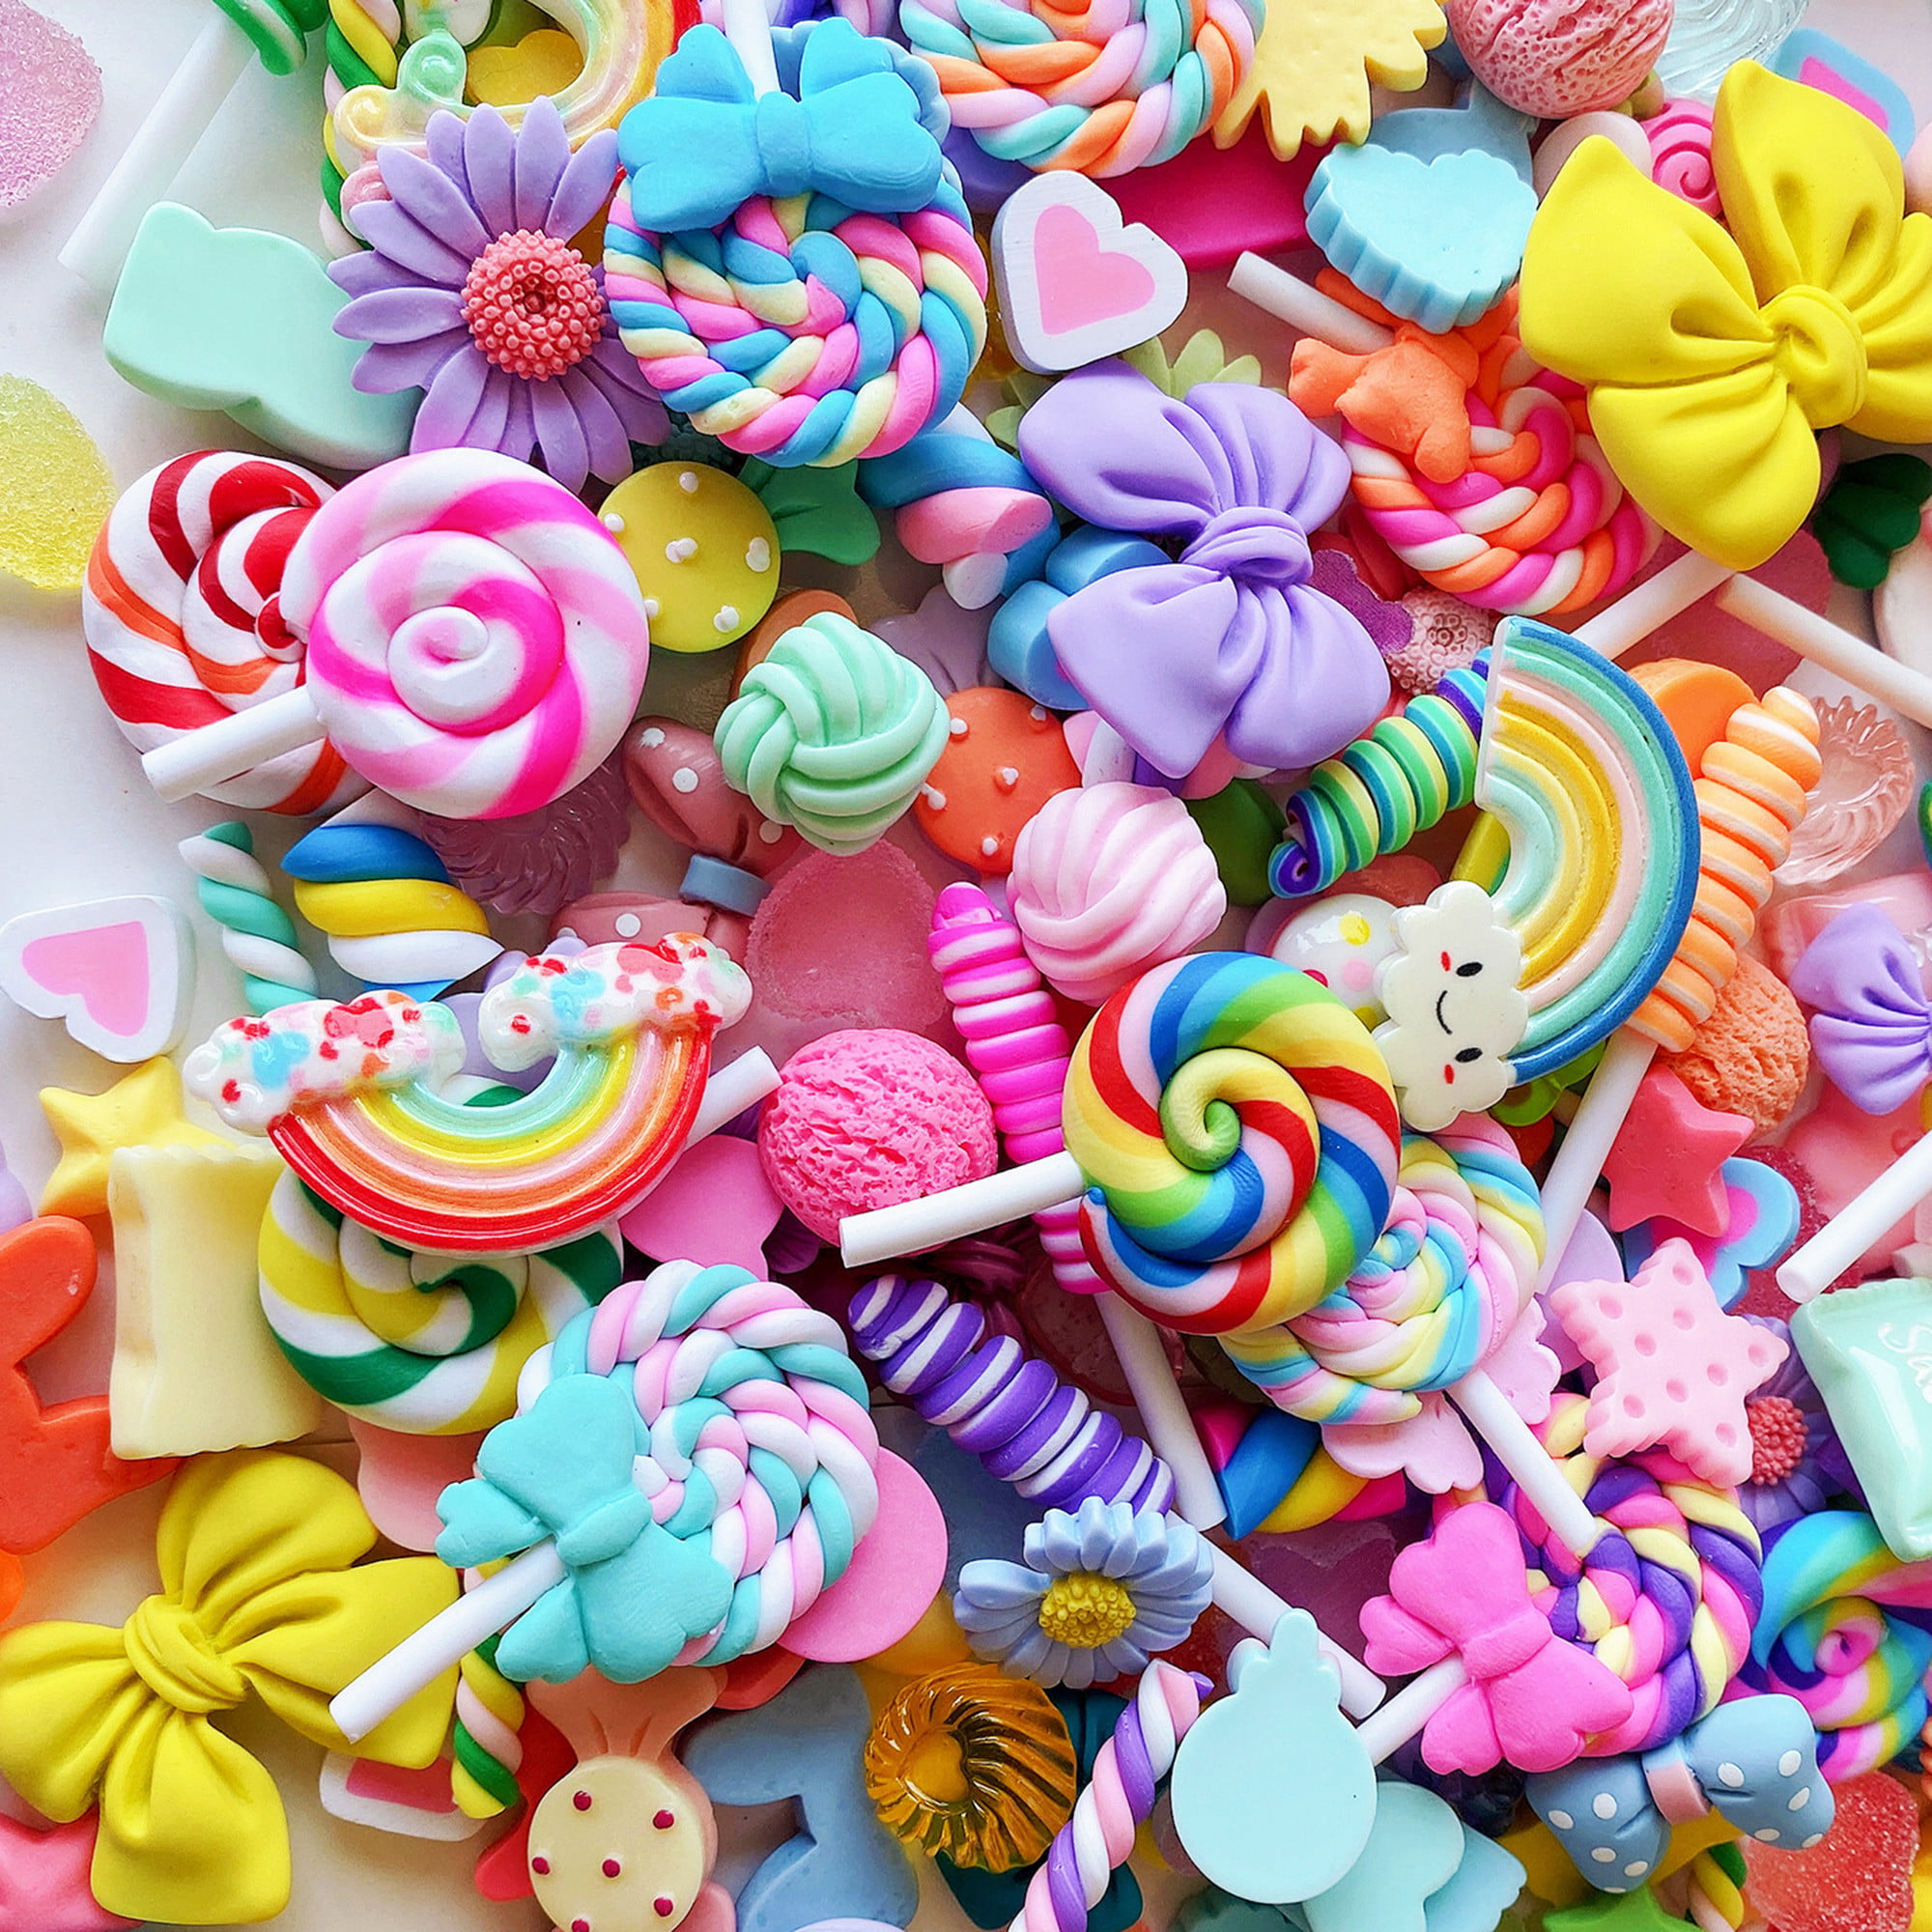 LNKOO 60 Pieces Slime Charms Set Candy Sweets Charms Mixed